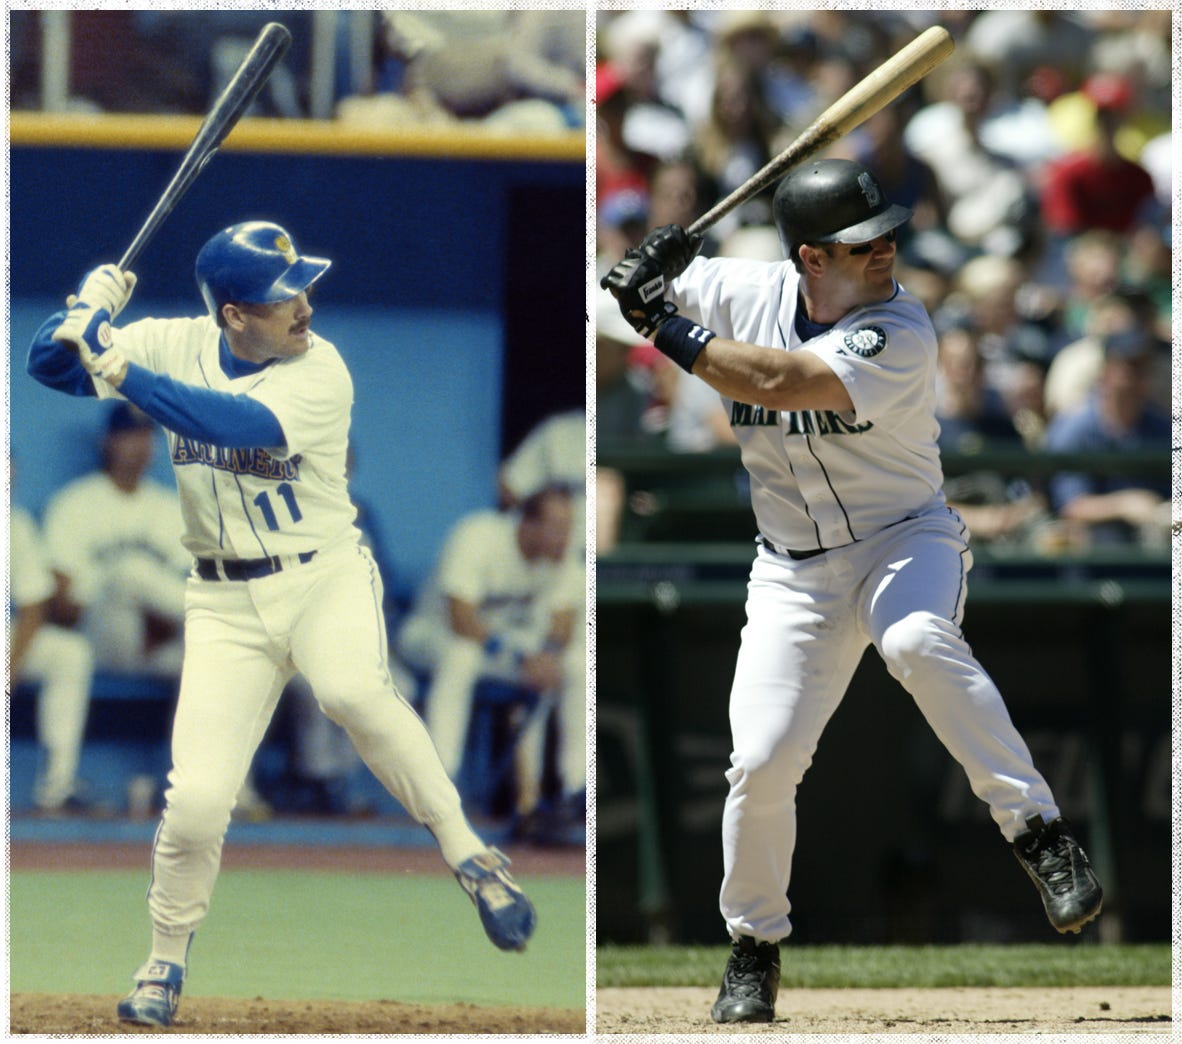 The Double': The hit that made Edgar Martinez a legend and saved baseball  in Seattle - The Athletic